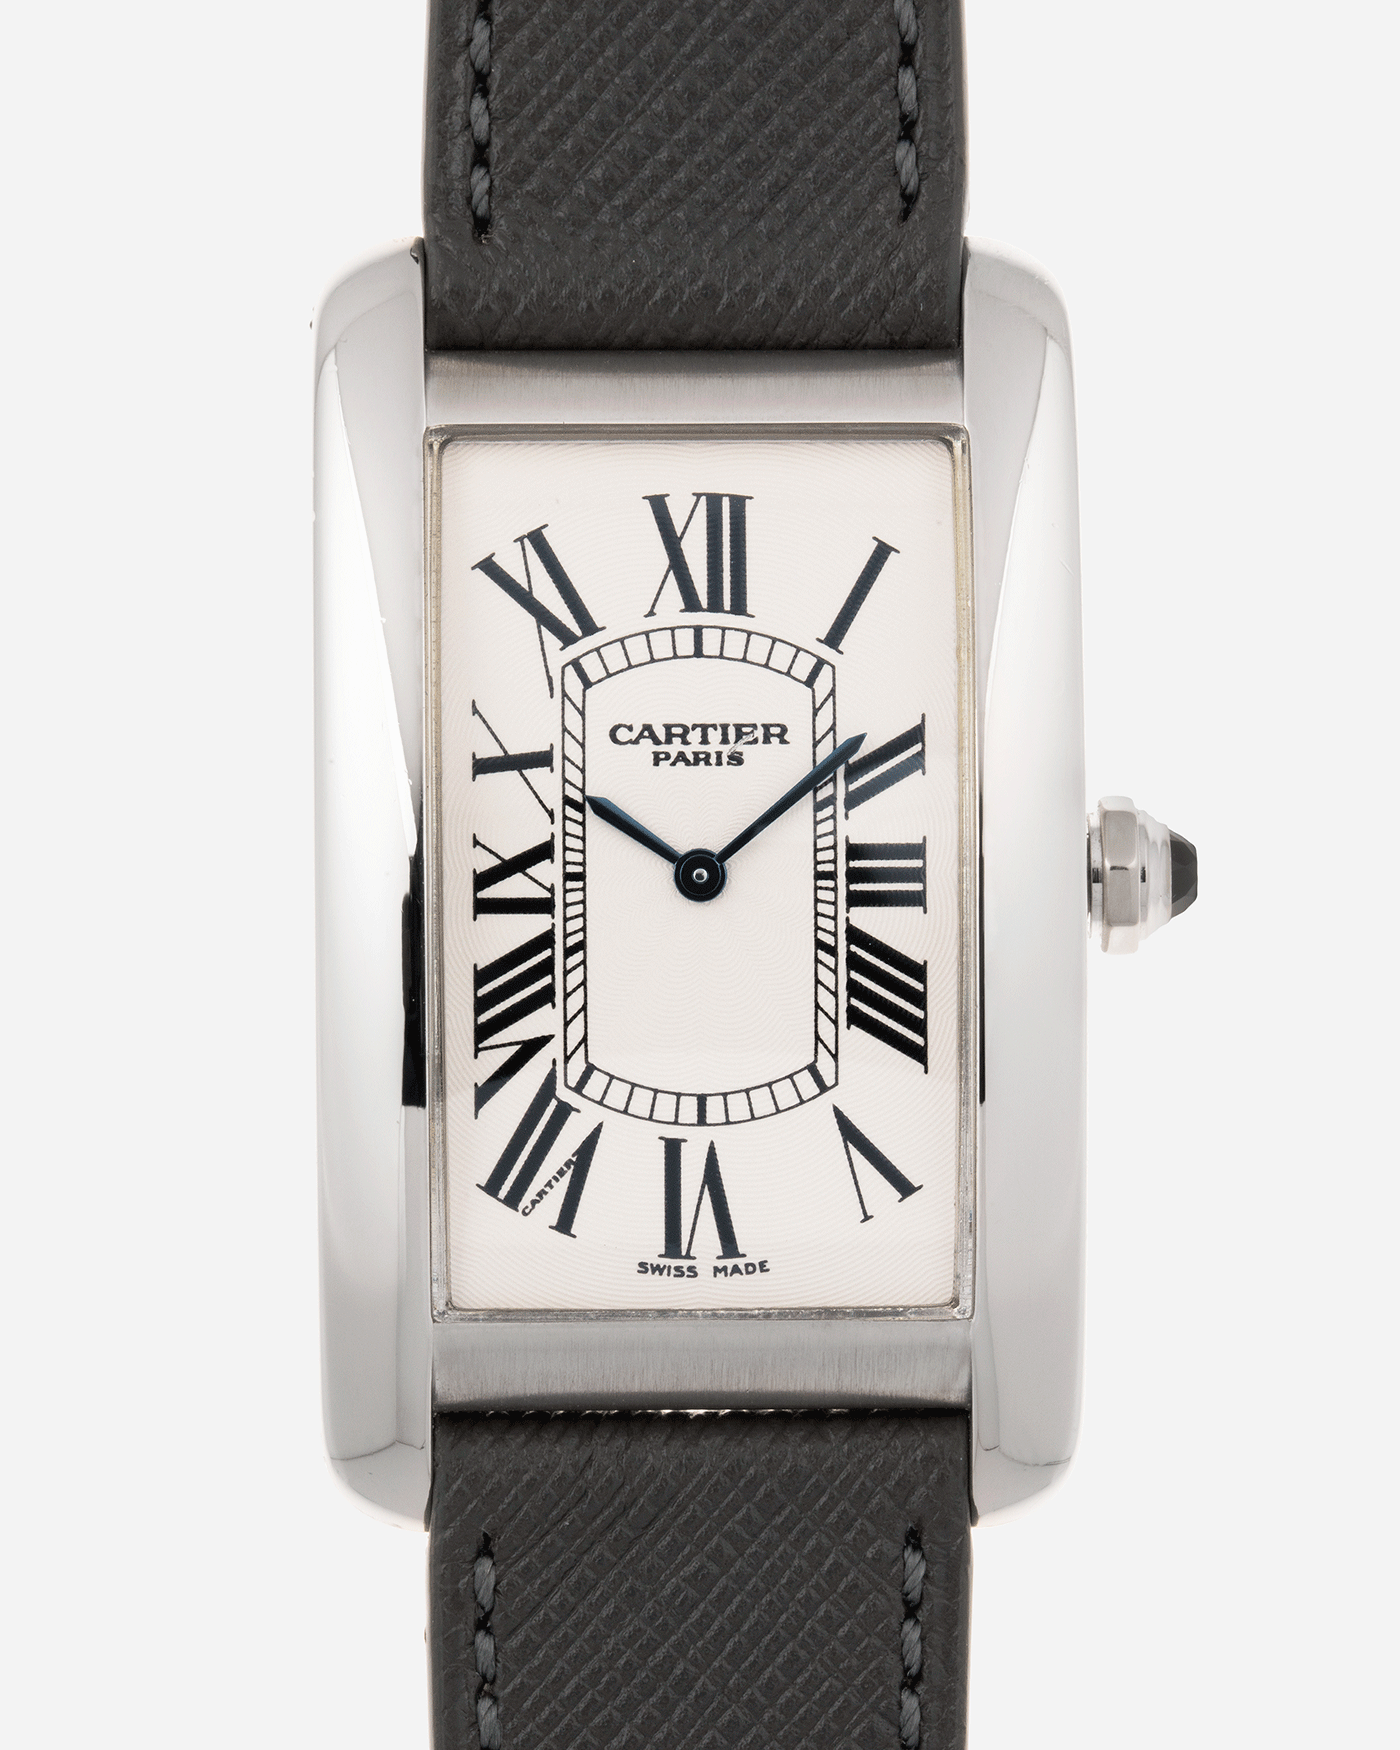 Brand: Cartier Year: 2007 Model: CPCP Collection Prive Tank Americaine Reference: 1734 Material: Platinum Movement: Cartier Caliber 430 MC Case Diameter: 45mm X26mm Strap: Grey Molequin Textured Calf Strap with separate White Gold Cartier Tang Buckle